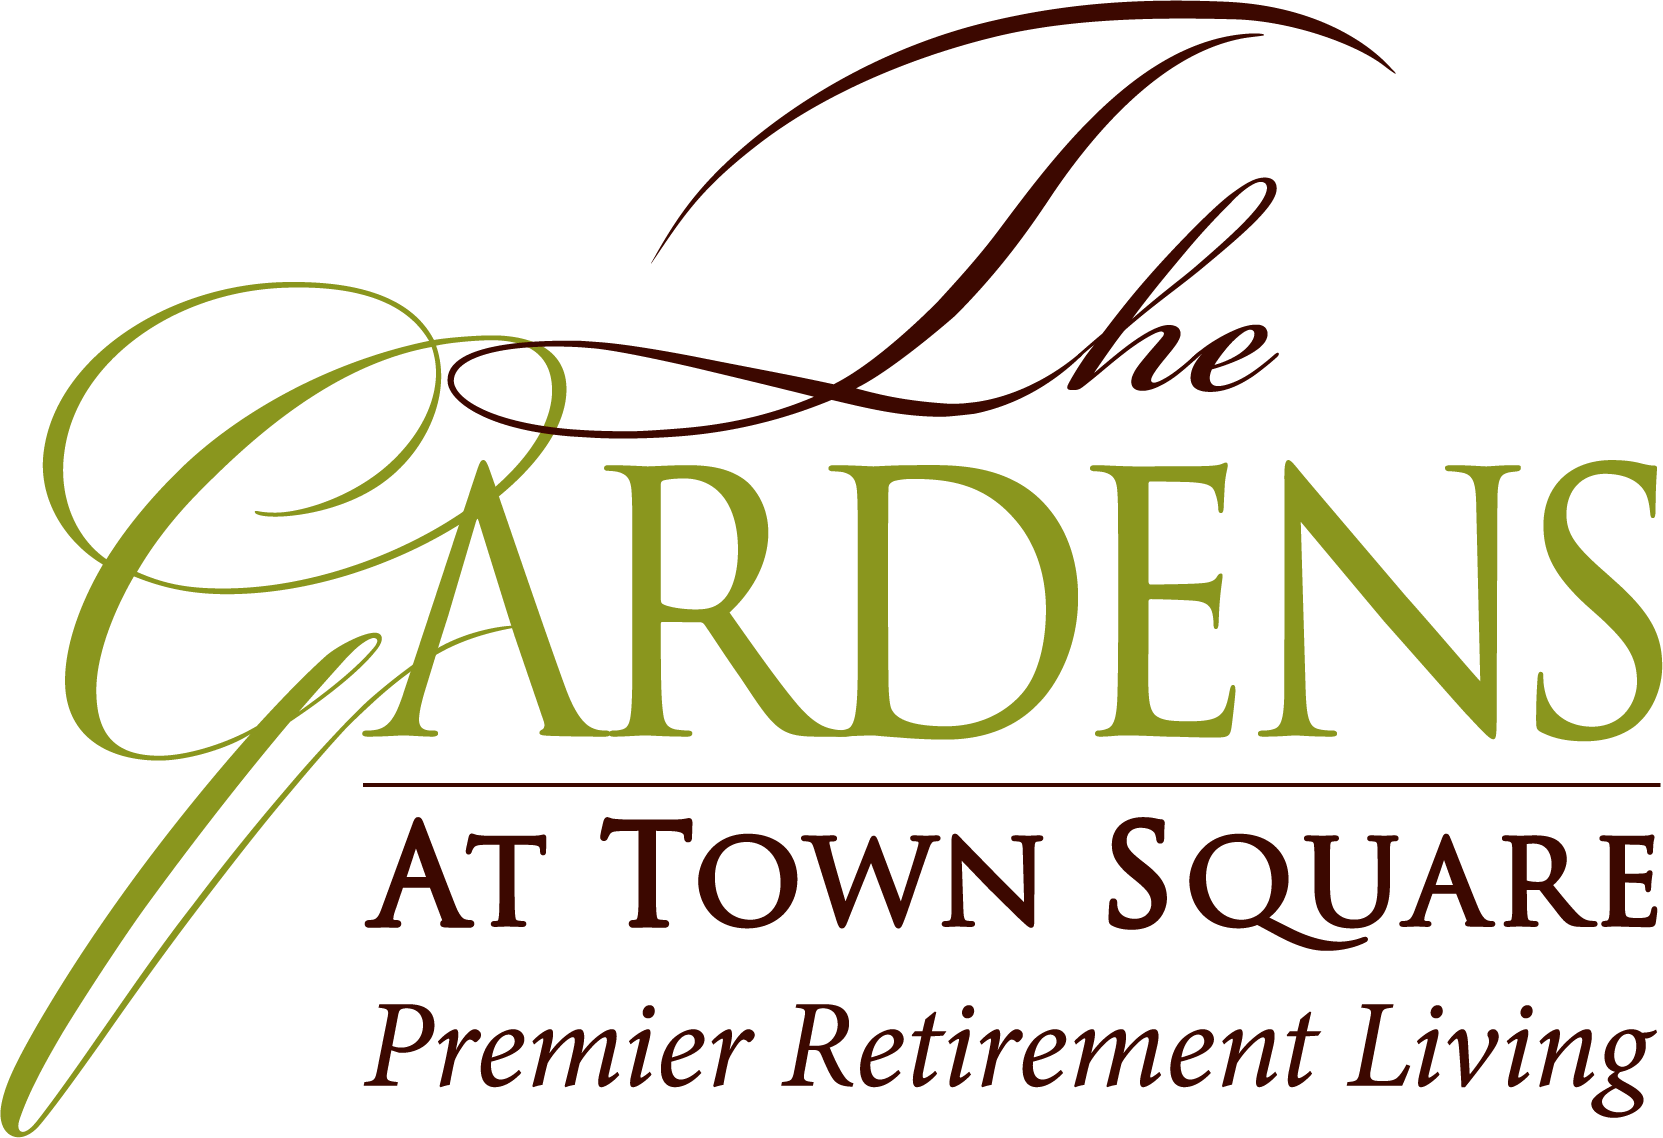 Era Living - The Gardens at Town Square